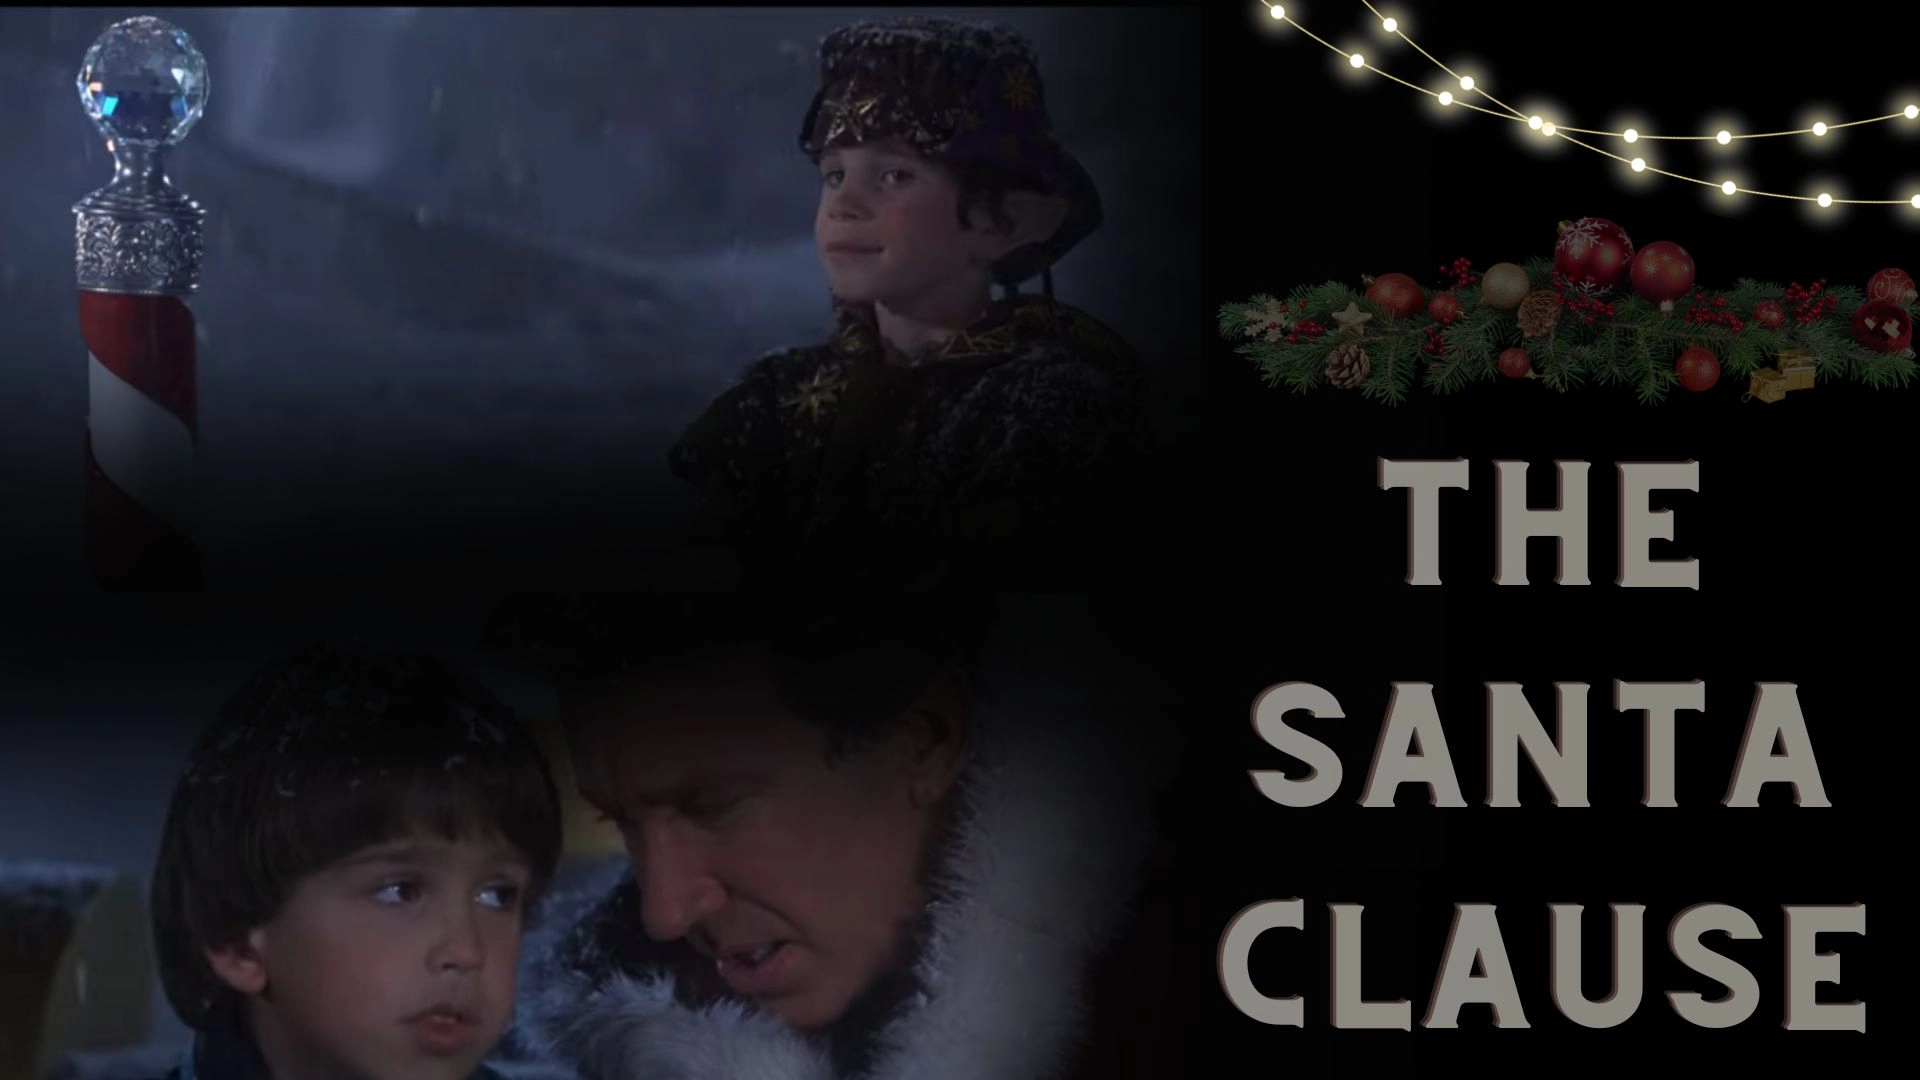 The Santa Clause Parents Guide and Age Rating (1994)